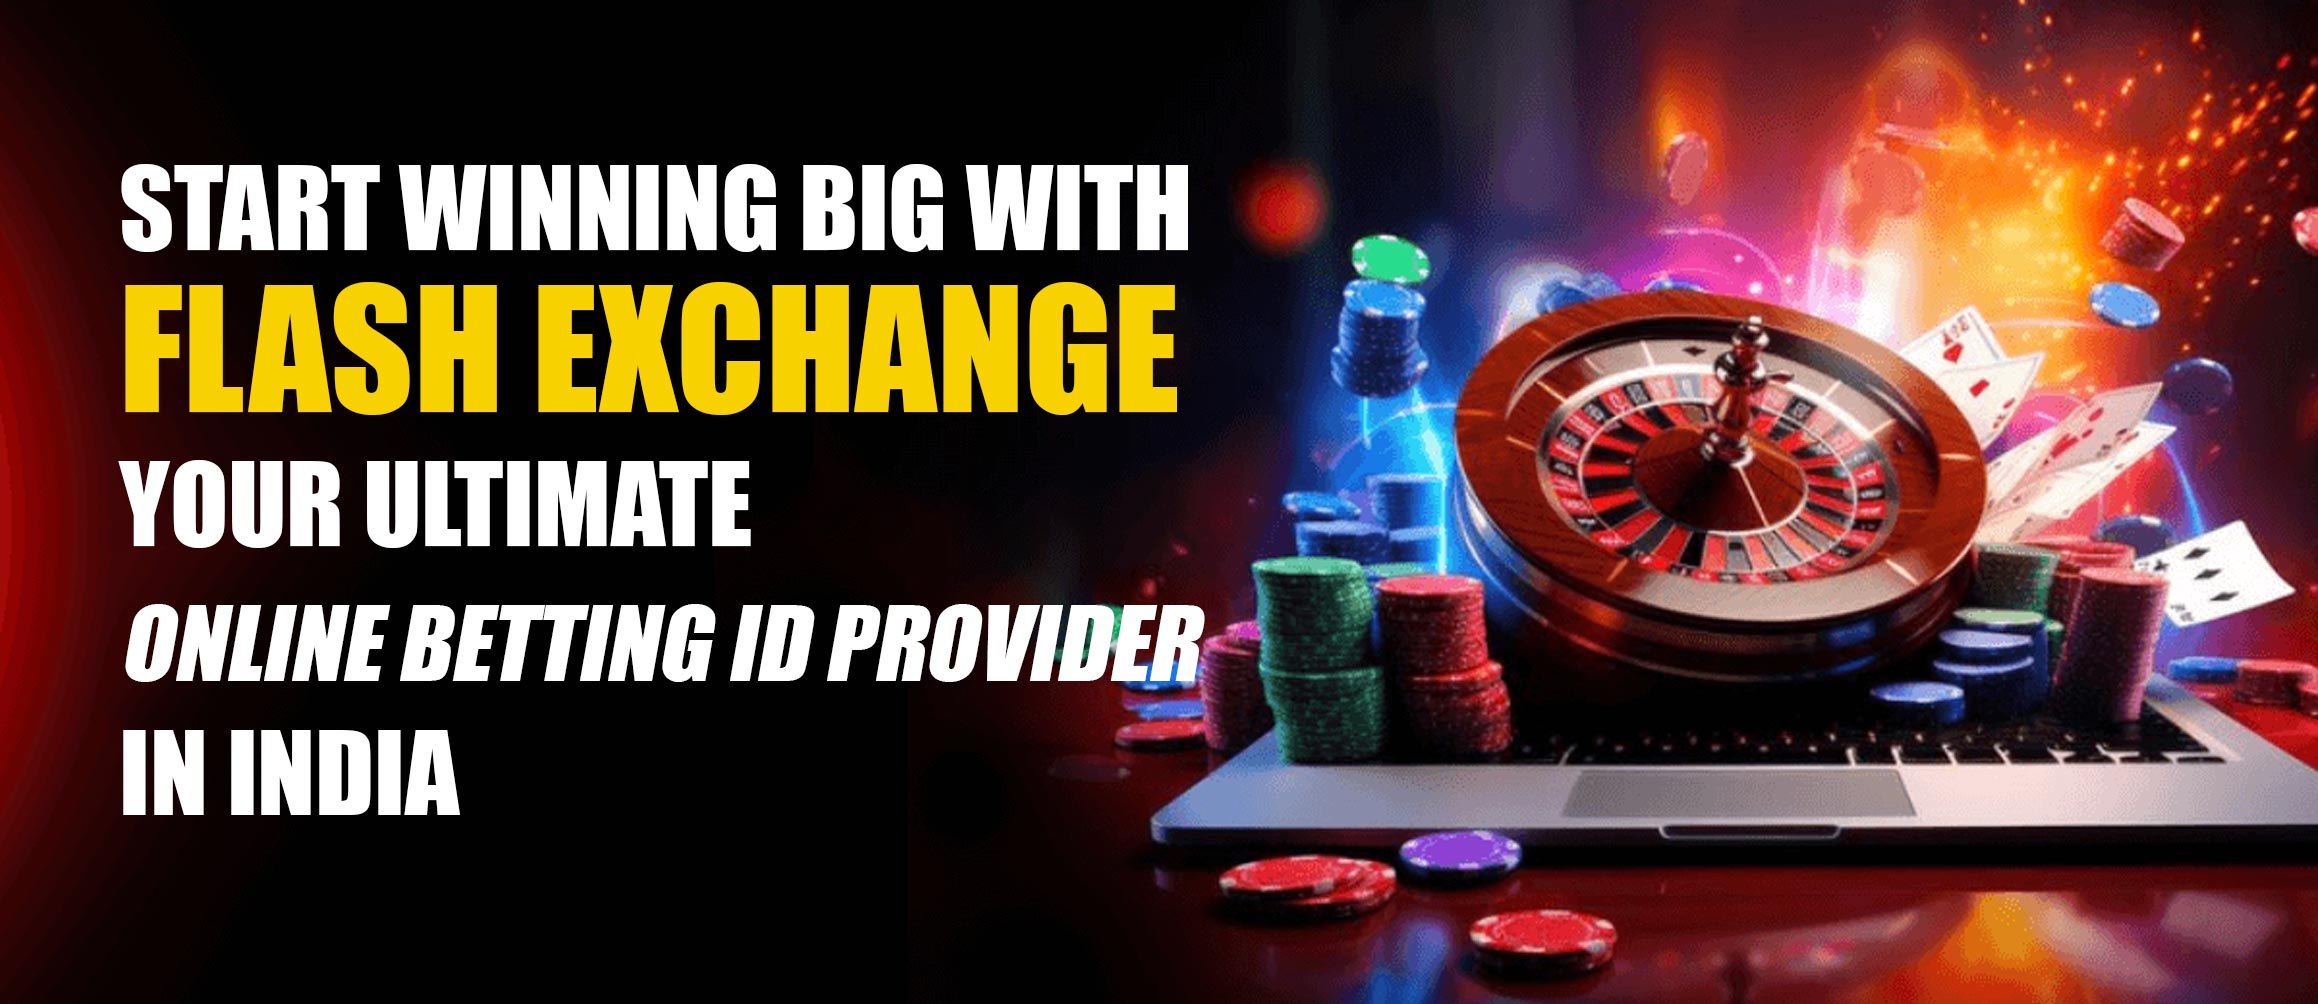 Start Winning Big with Flash Exchange: Your Ultimate Online Betting ID Provider in India!